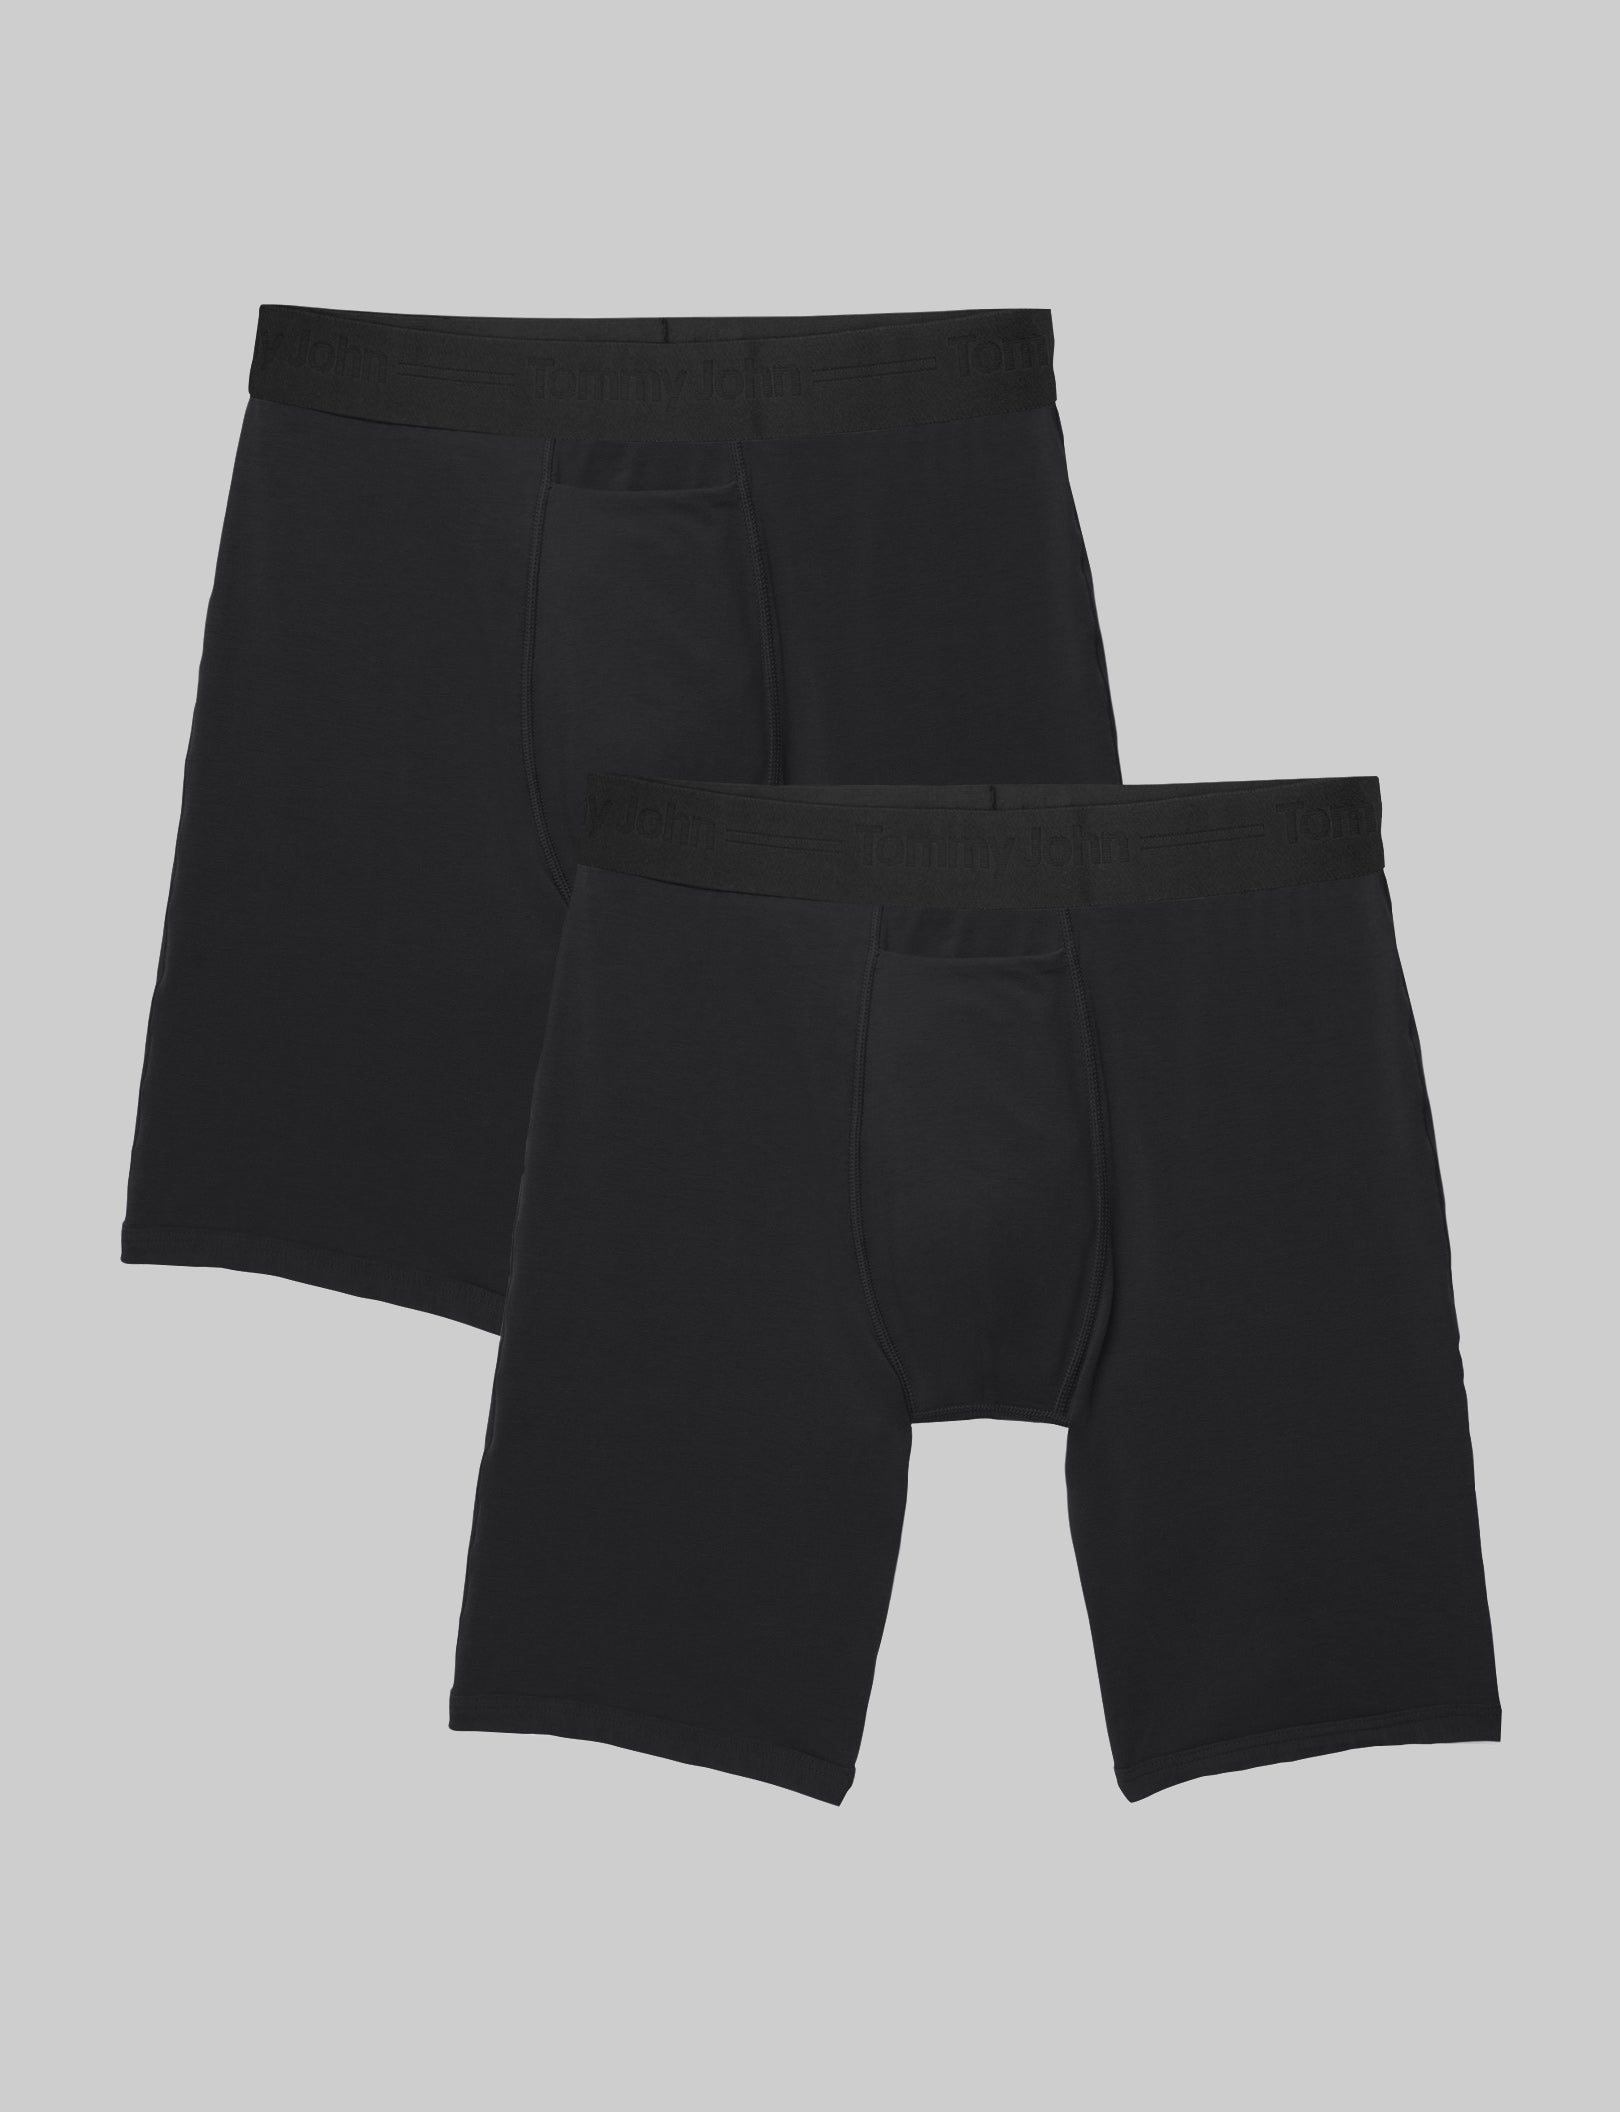 Tommy John Boxer Brief Cotton Basic 6 Inseam Small 2 pairs Black Logo Band  NEW